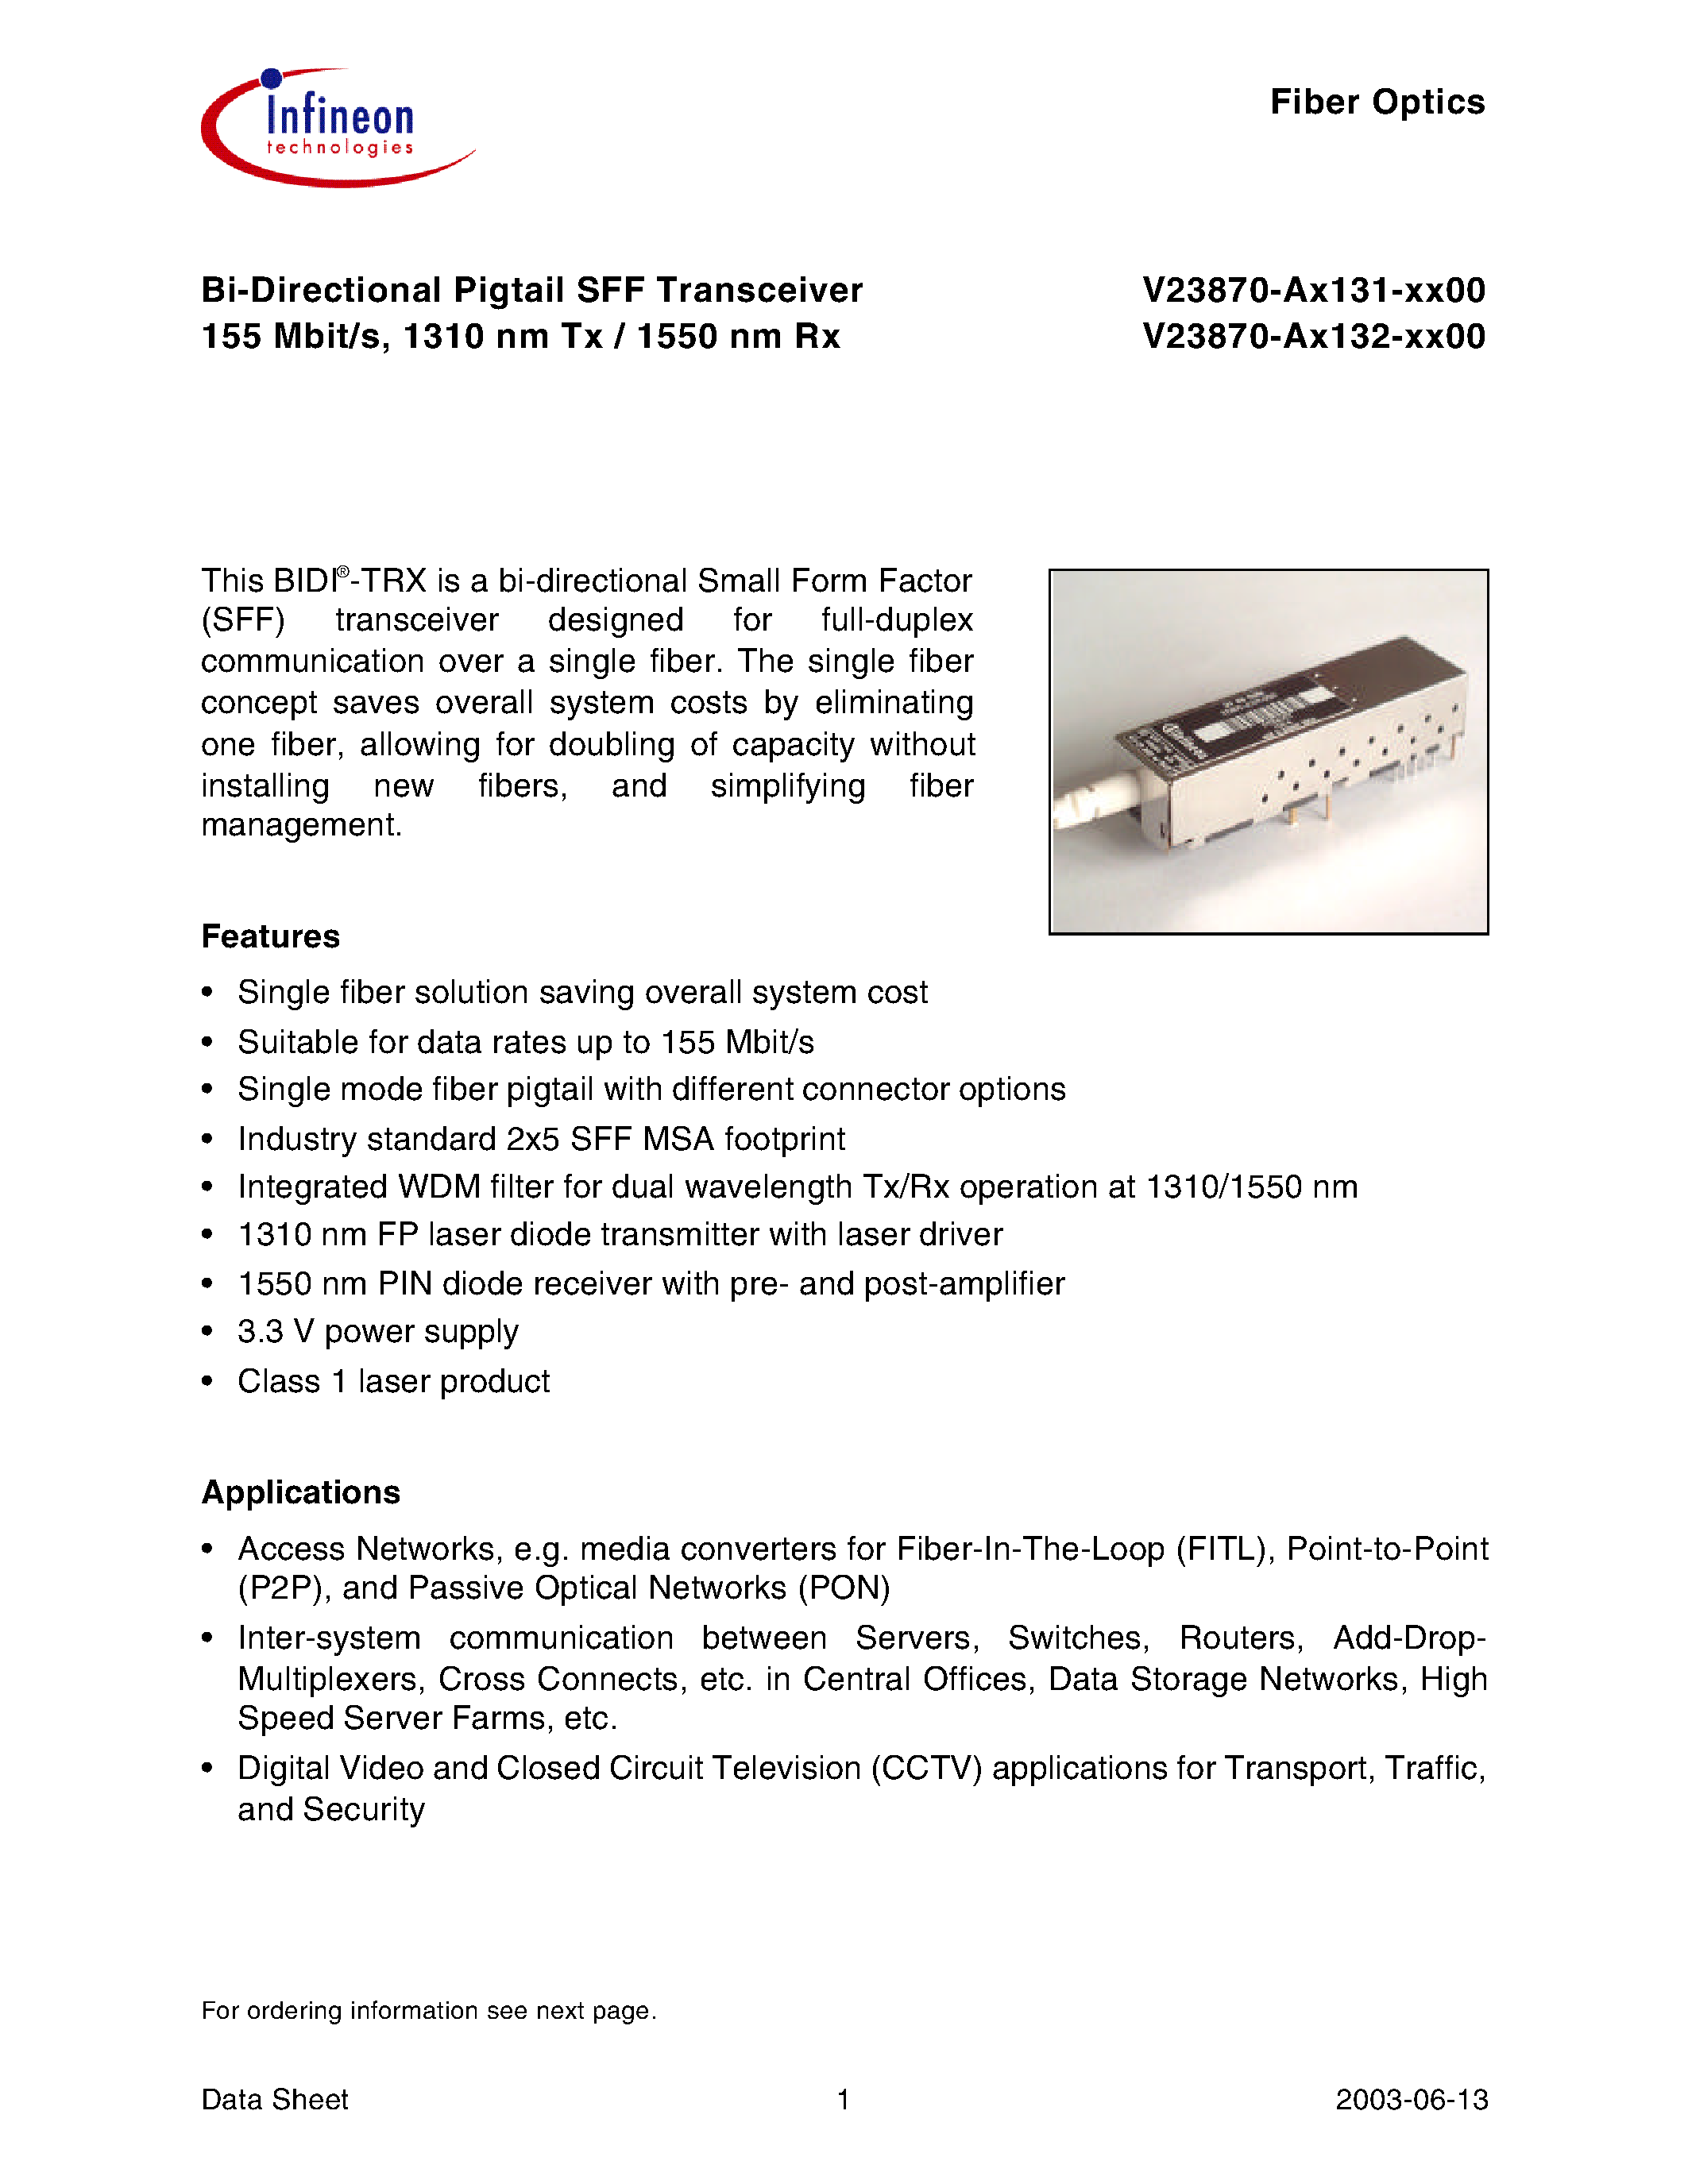 Datasheet V23870-A1131-A500 - Bi-Directional Pigtail SFF Transceiver 155 Mbit/s/ 1310 nm Tx / 1550 nm Rx page 1